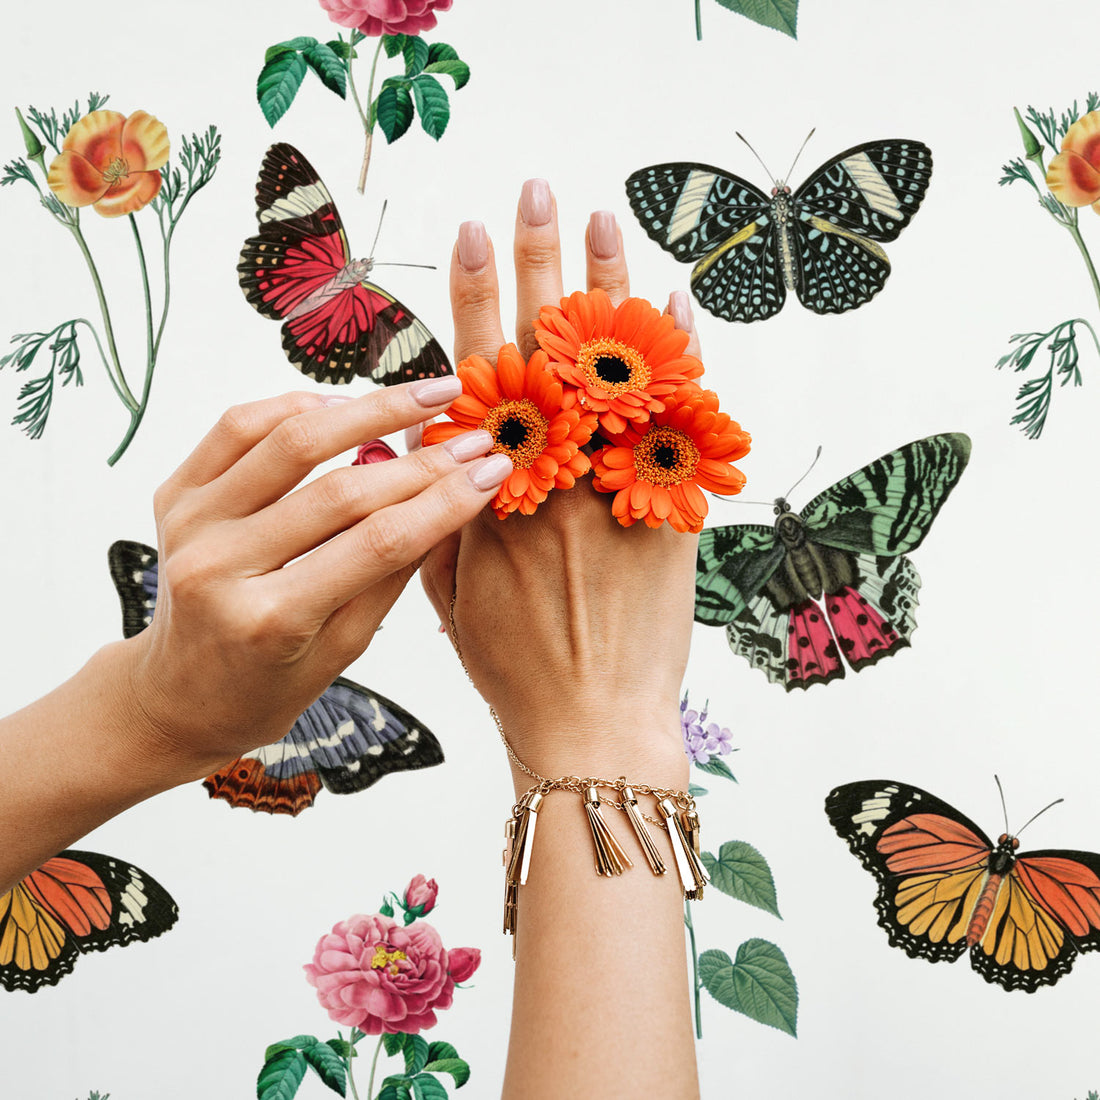 Vintage butterflies wallpaper in colorful colors and flowers for girls interiors